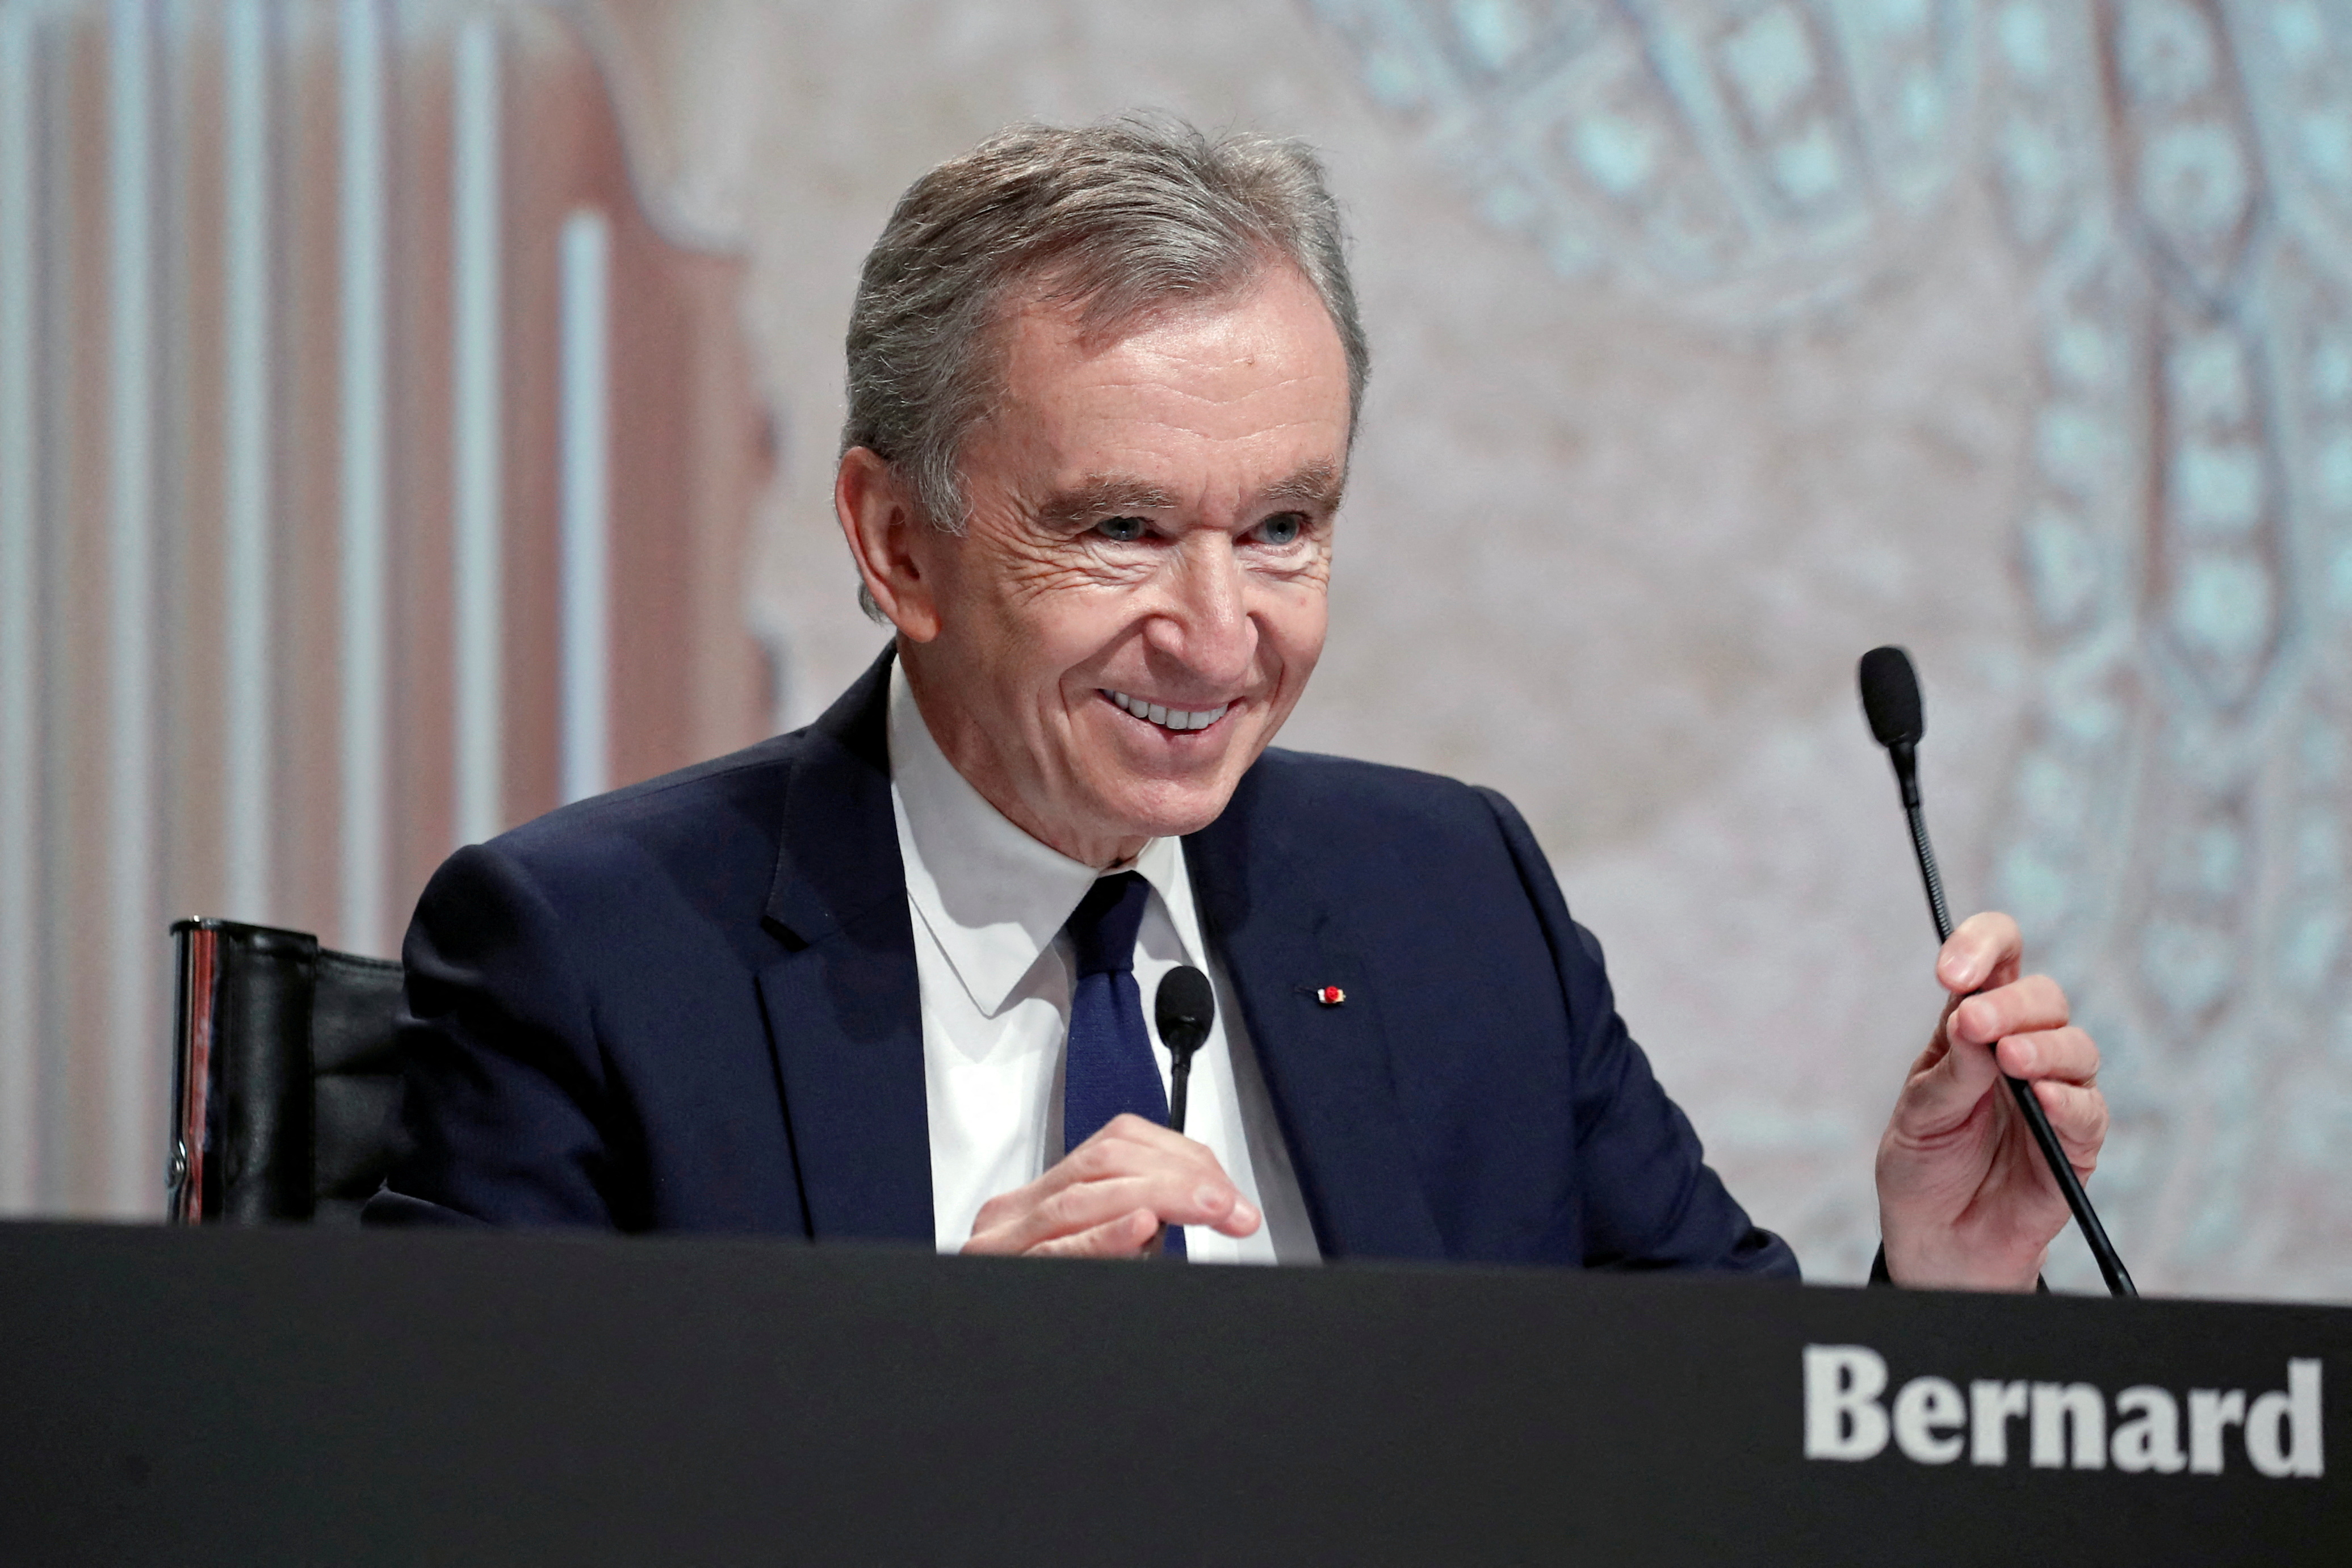 Bernard Arnault, Chief Executive Officer of LVMH Moet Hennessy Louis Vuitton SE, attends the company's shareholders meeting in Paris